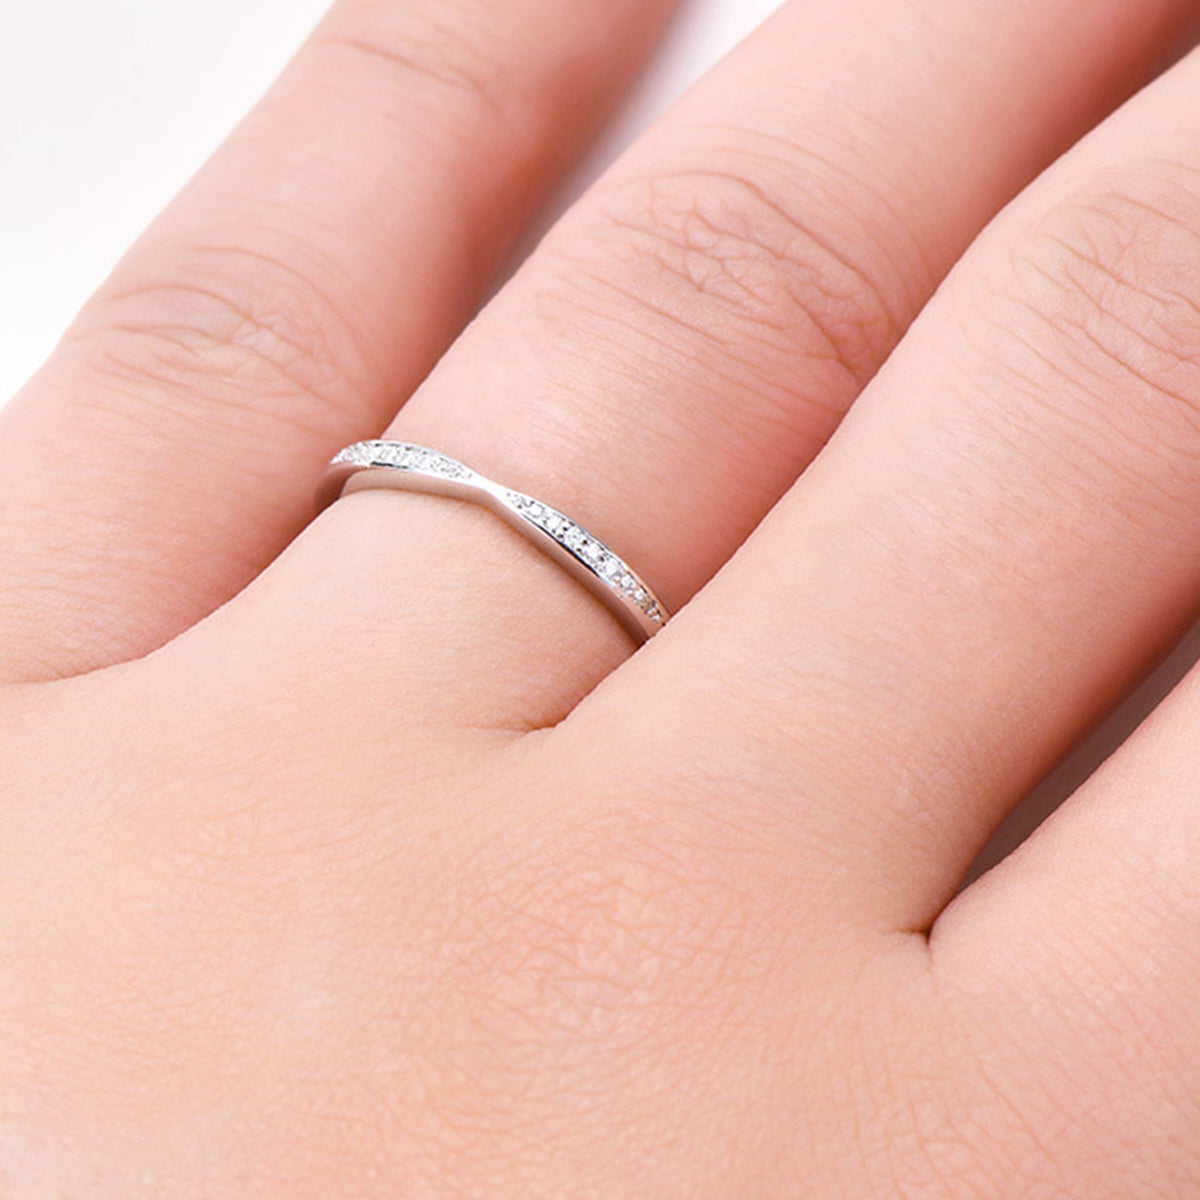 Super Simple Sleek & Chic 925 Sterling Silver Inlaid Moissanite Ring